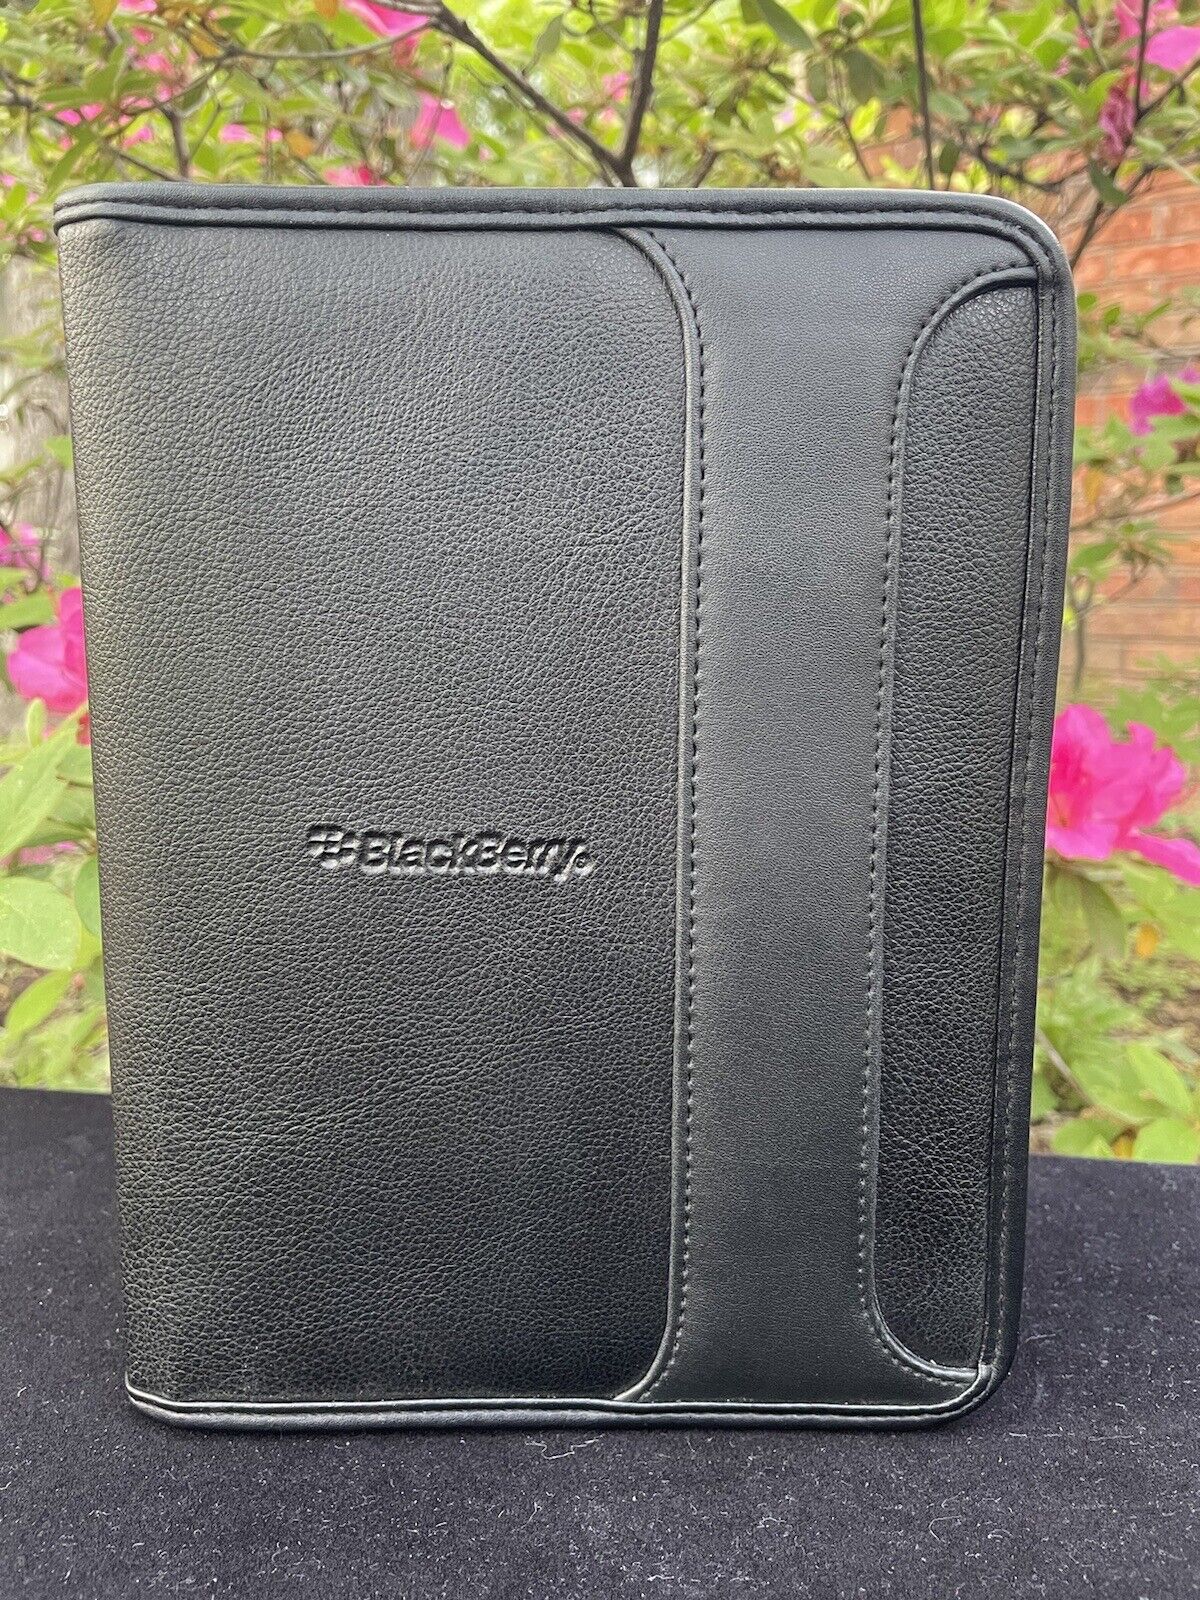 Leed’s Padfolio Notebook Cover Black Faux Leather Zippered w/BlackBerry Logo